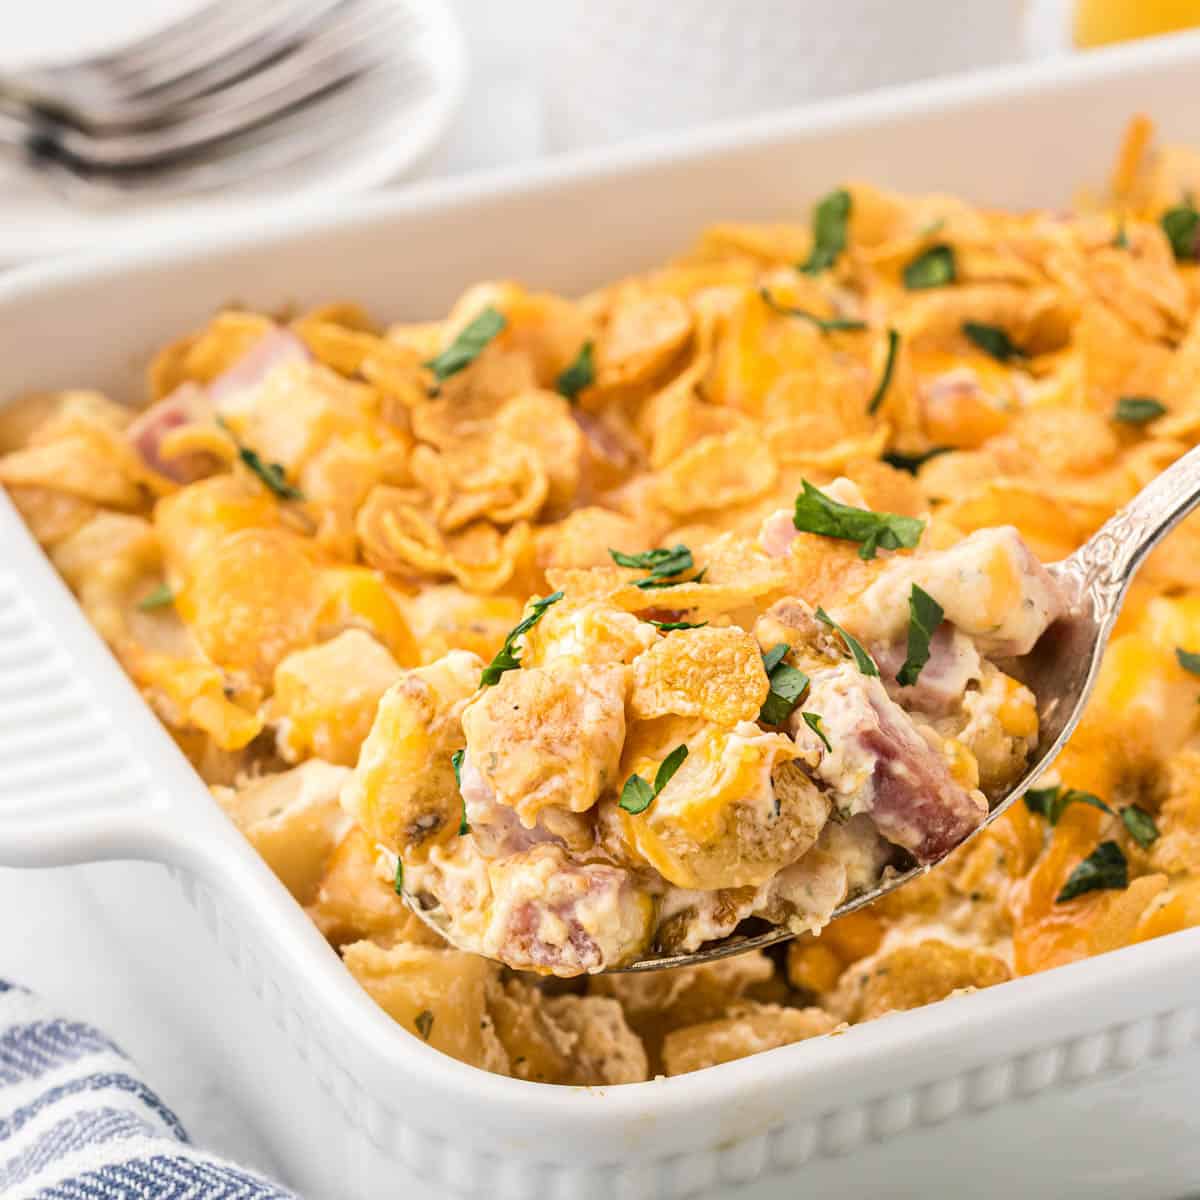 Eggless breakfast casserole in baking dish with a serving spoon taking a big scoop.